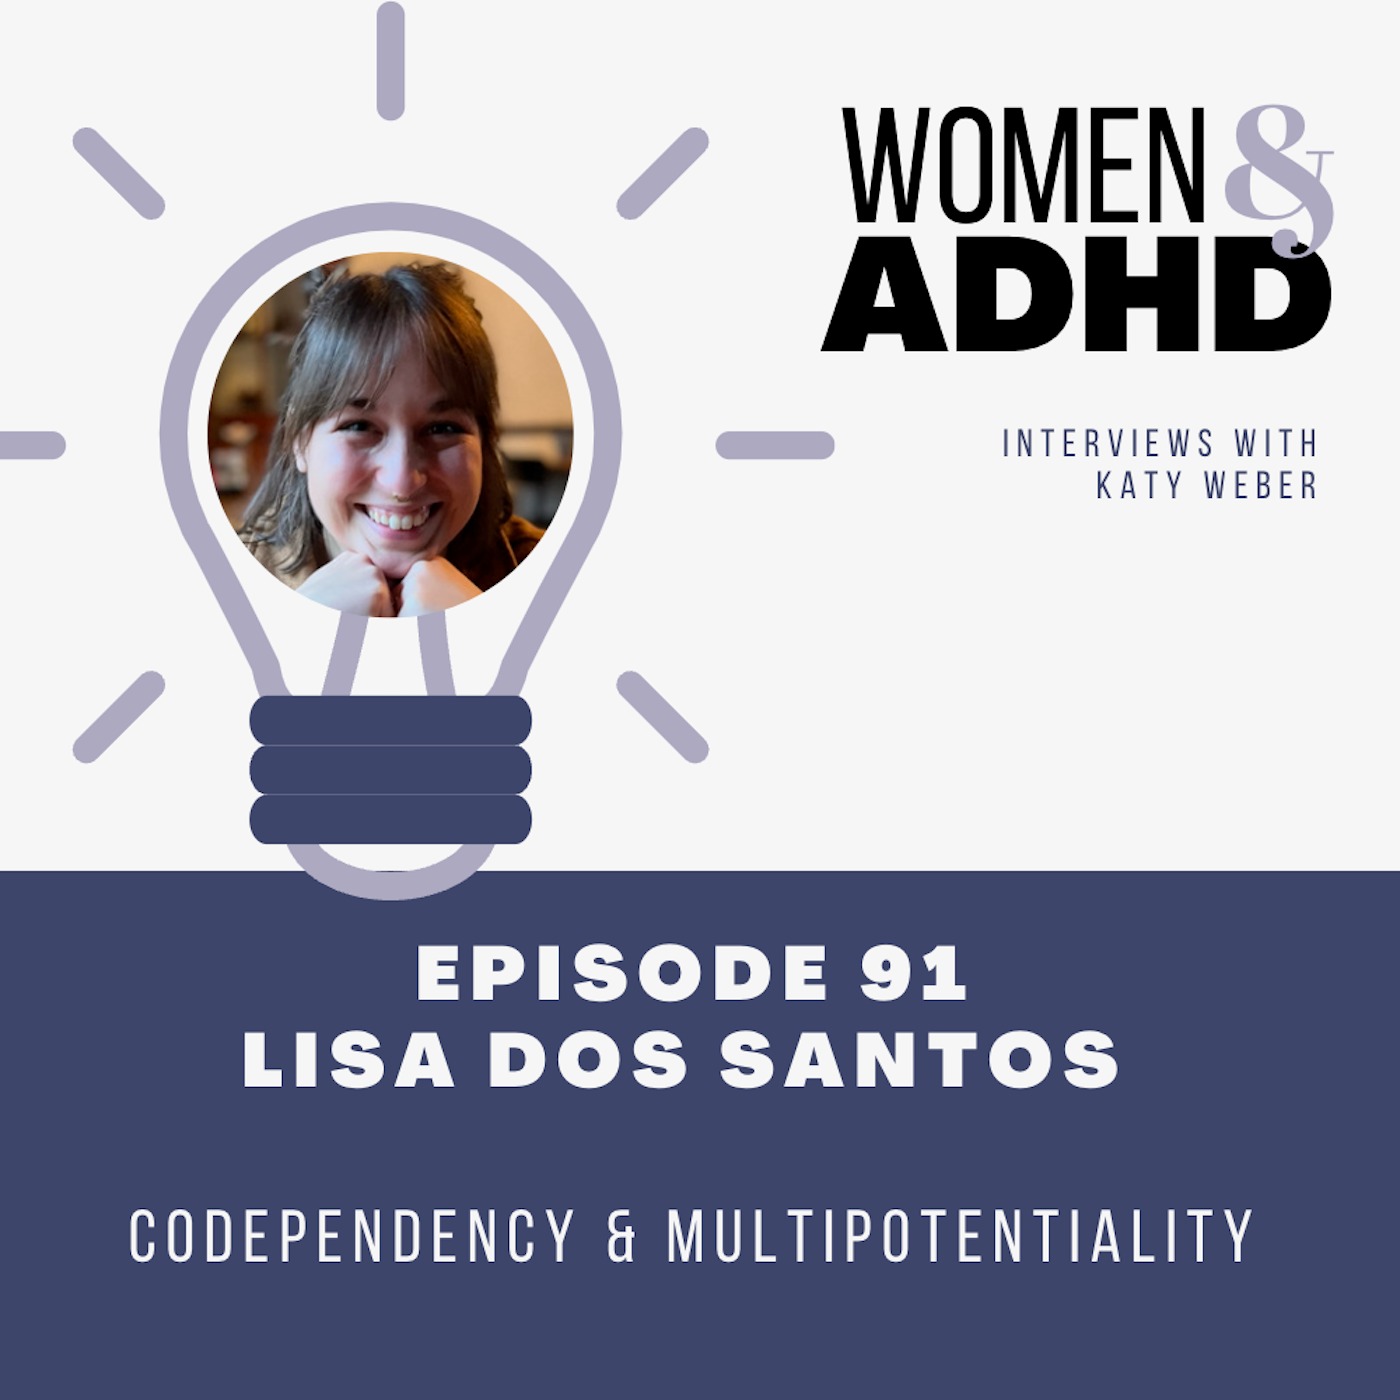 Lisa Dos Santos: Codependency & multipotentiality